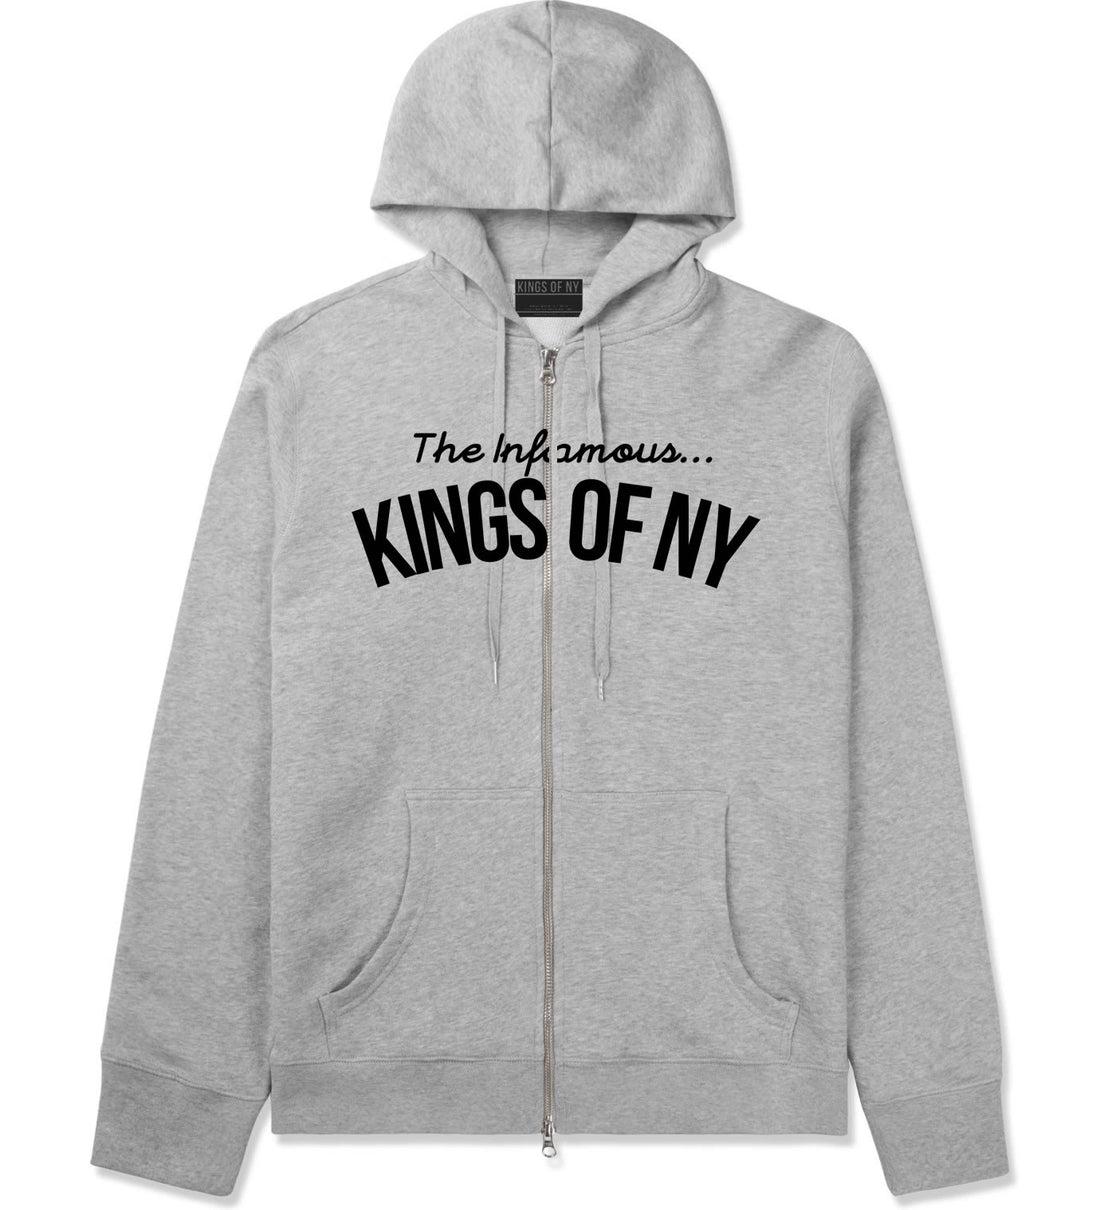 The Infamous Kings Of NY Zip Up Hoodie in Grey By Kings Of NY